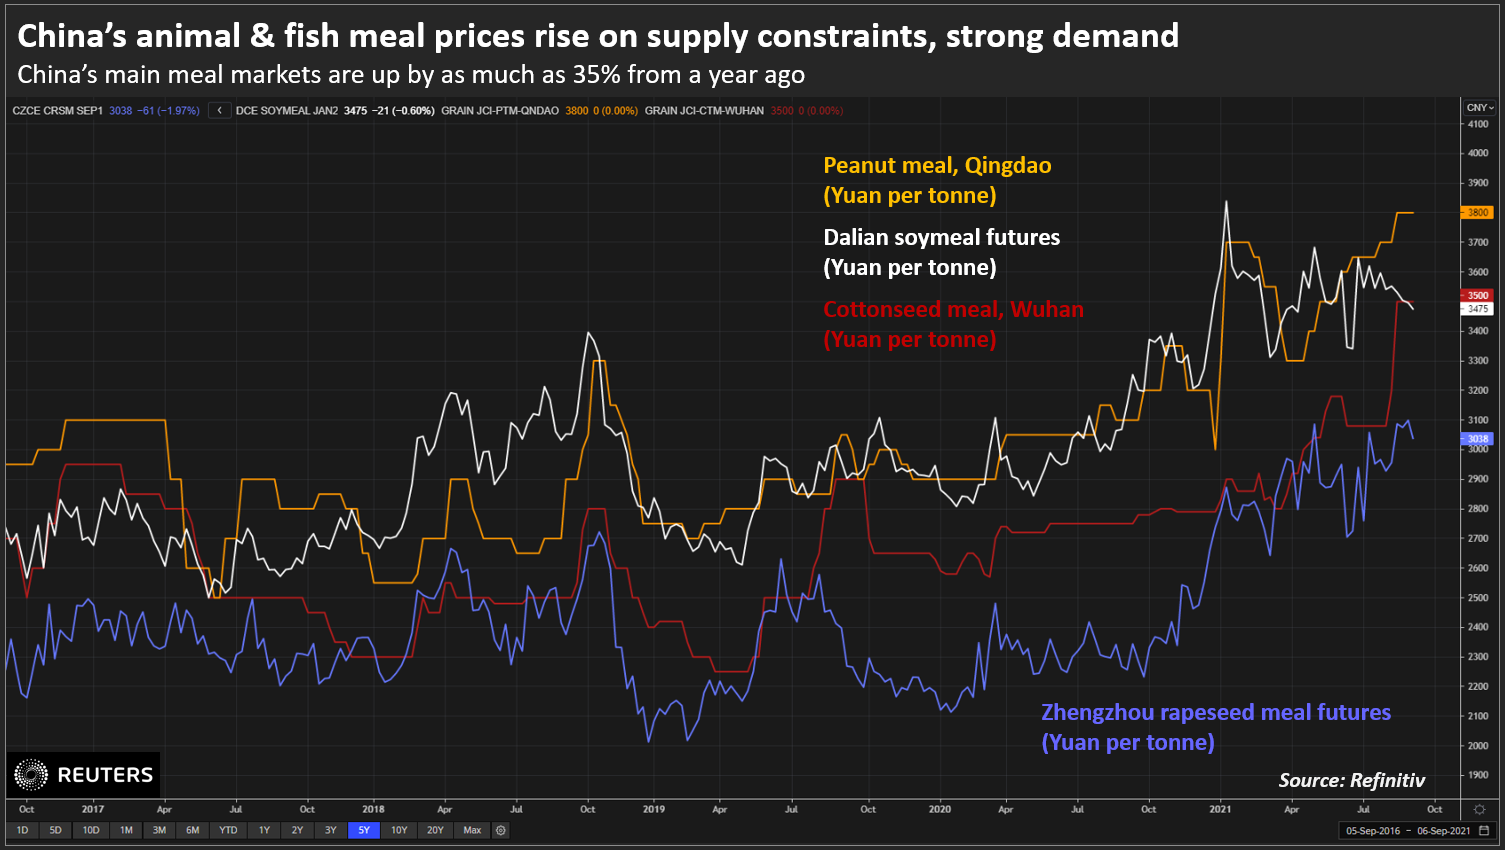 China’s animal & fish meal prices rise on supply constraints, strong demand